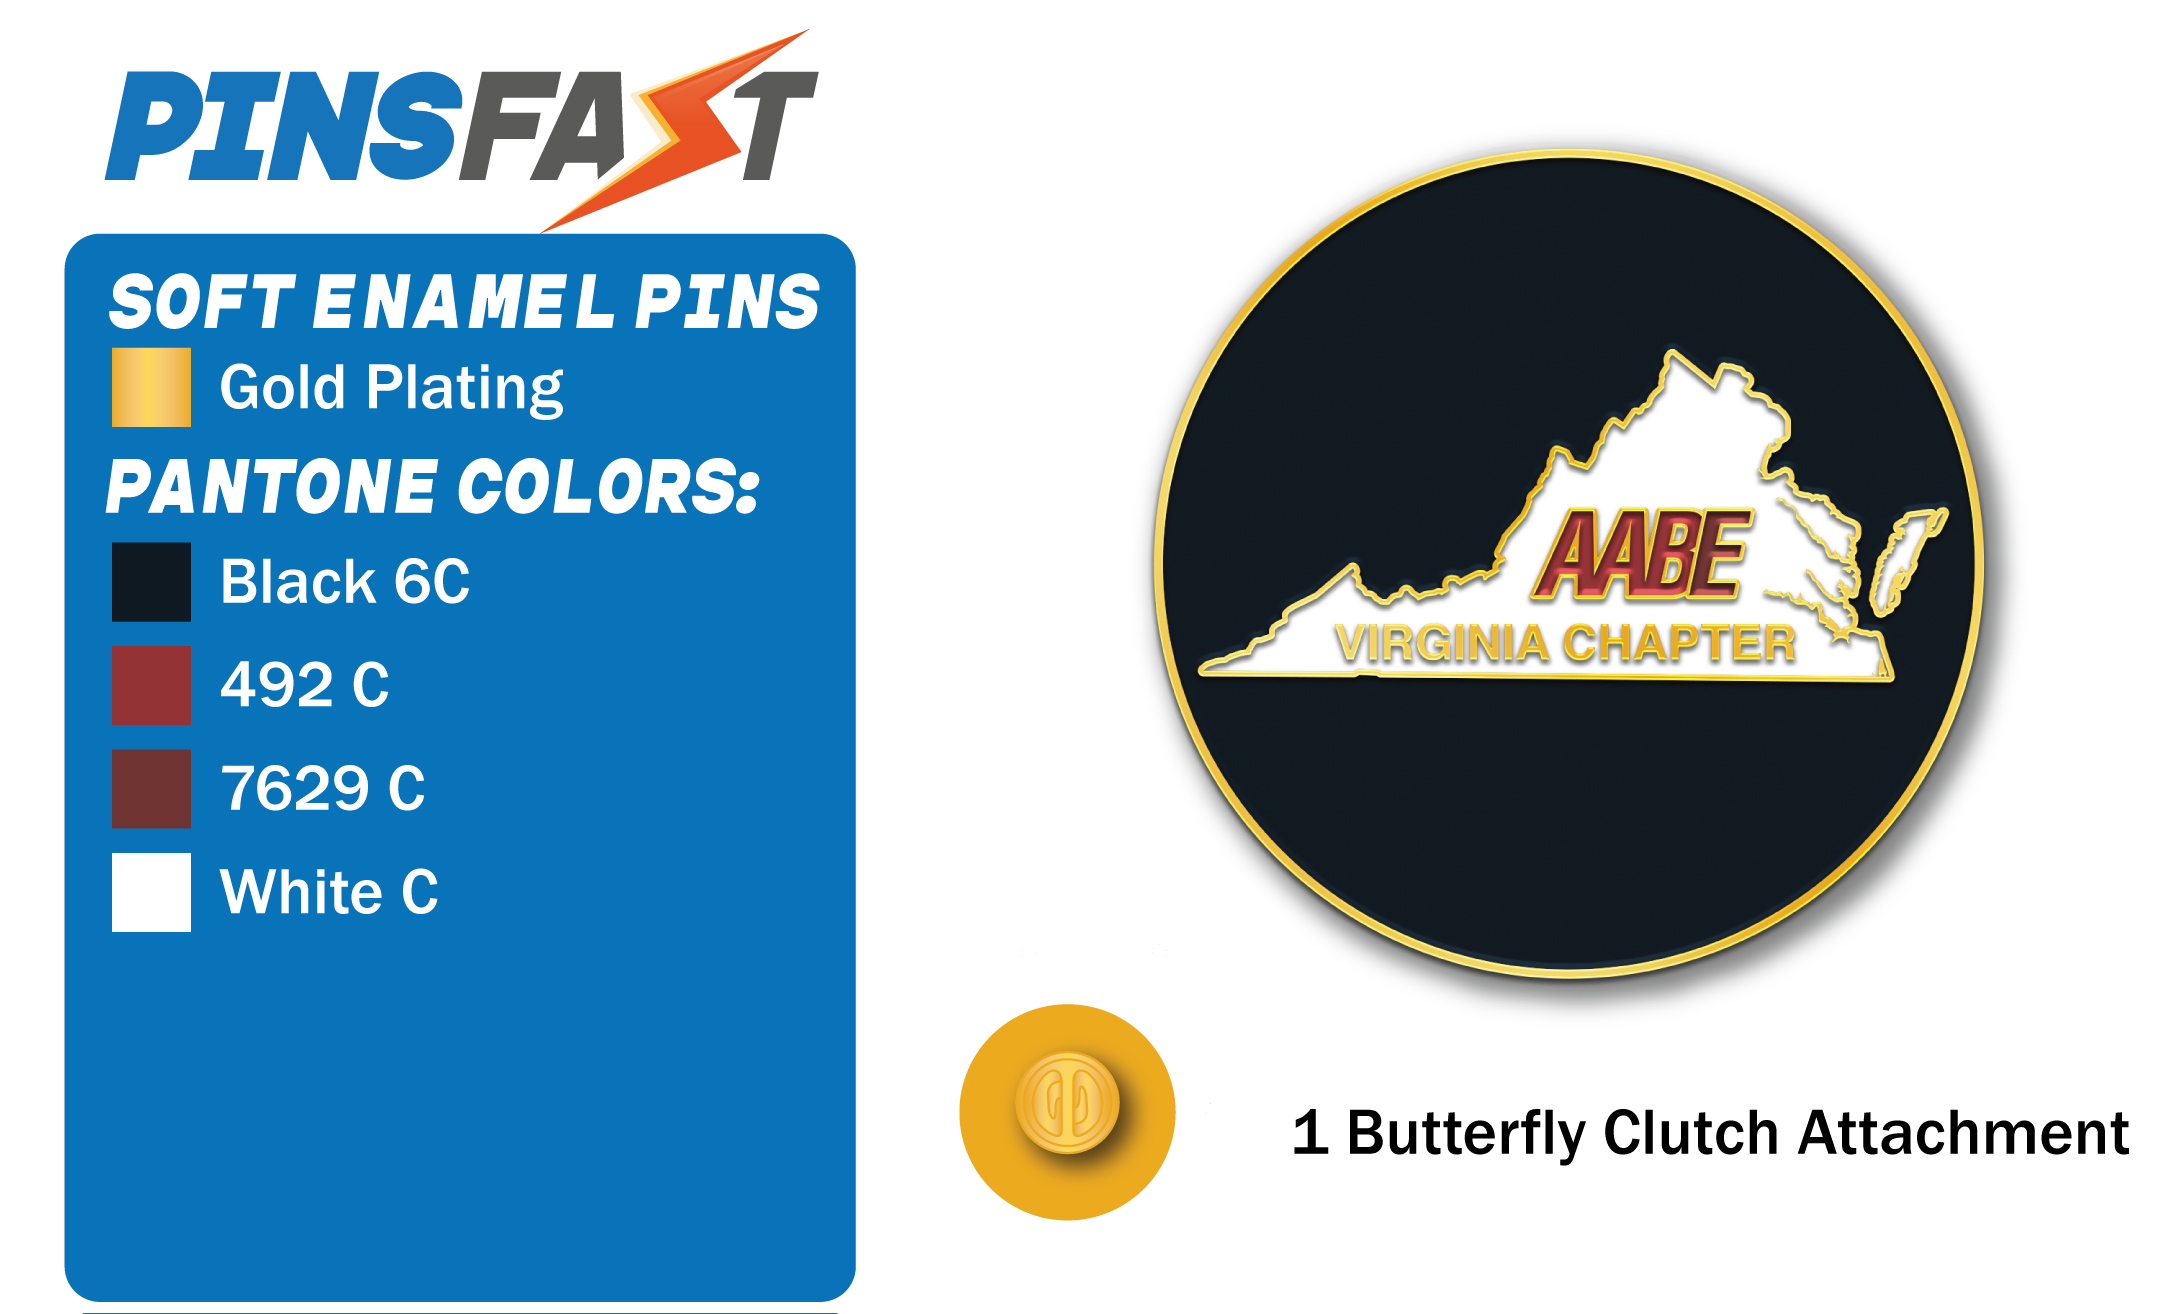 AABE Pins Fast